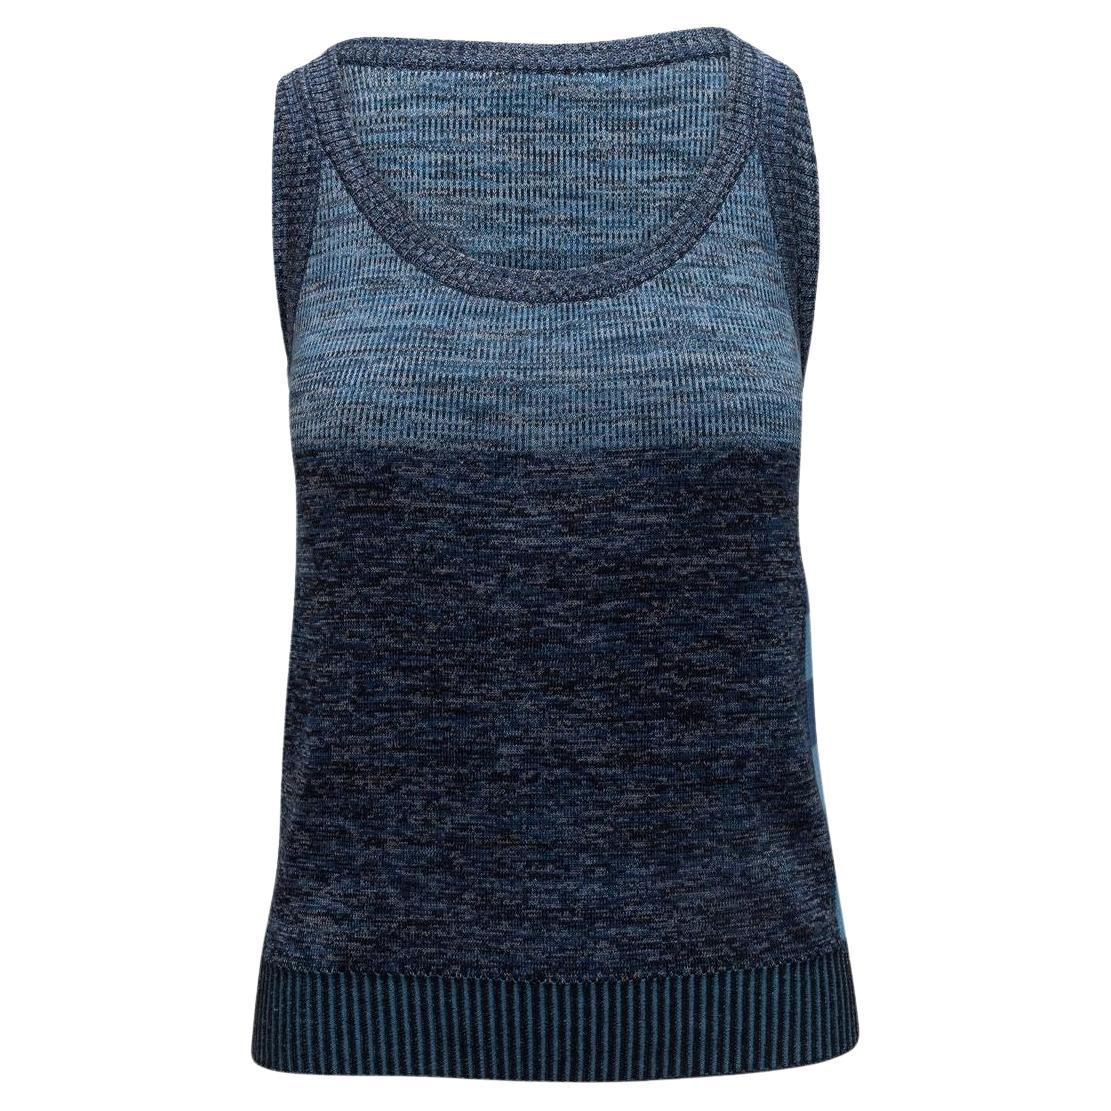 Gucci Teal Sleeveless Knit Top